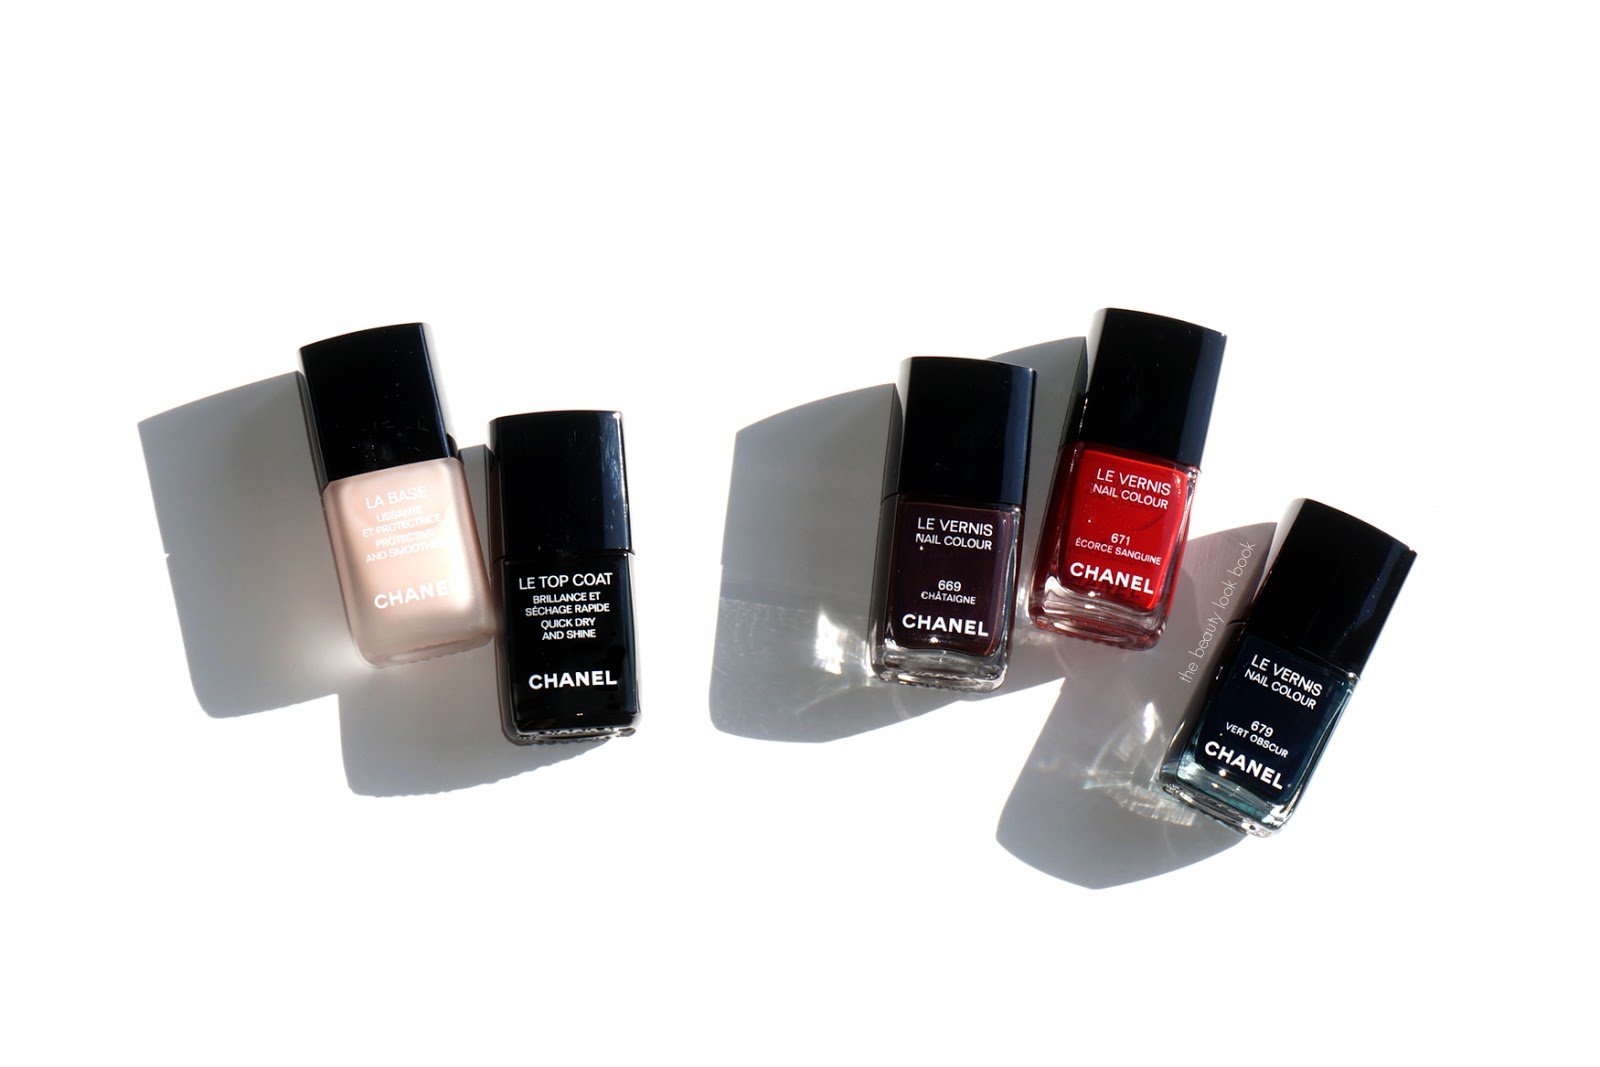 Chanel Collection Automnales La Base Coat, Le Top Coat and new Le Vernis in  Châtaigne, Écorce Sanguine and Vert Obscur - The Beauty Look Book